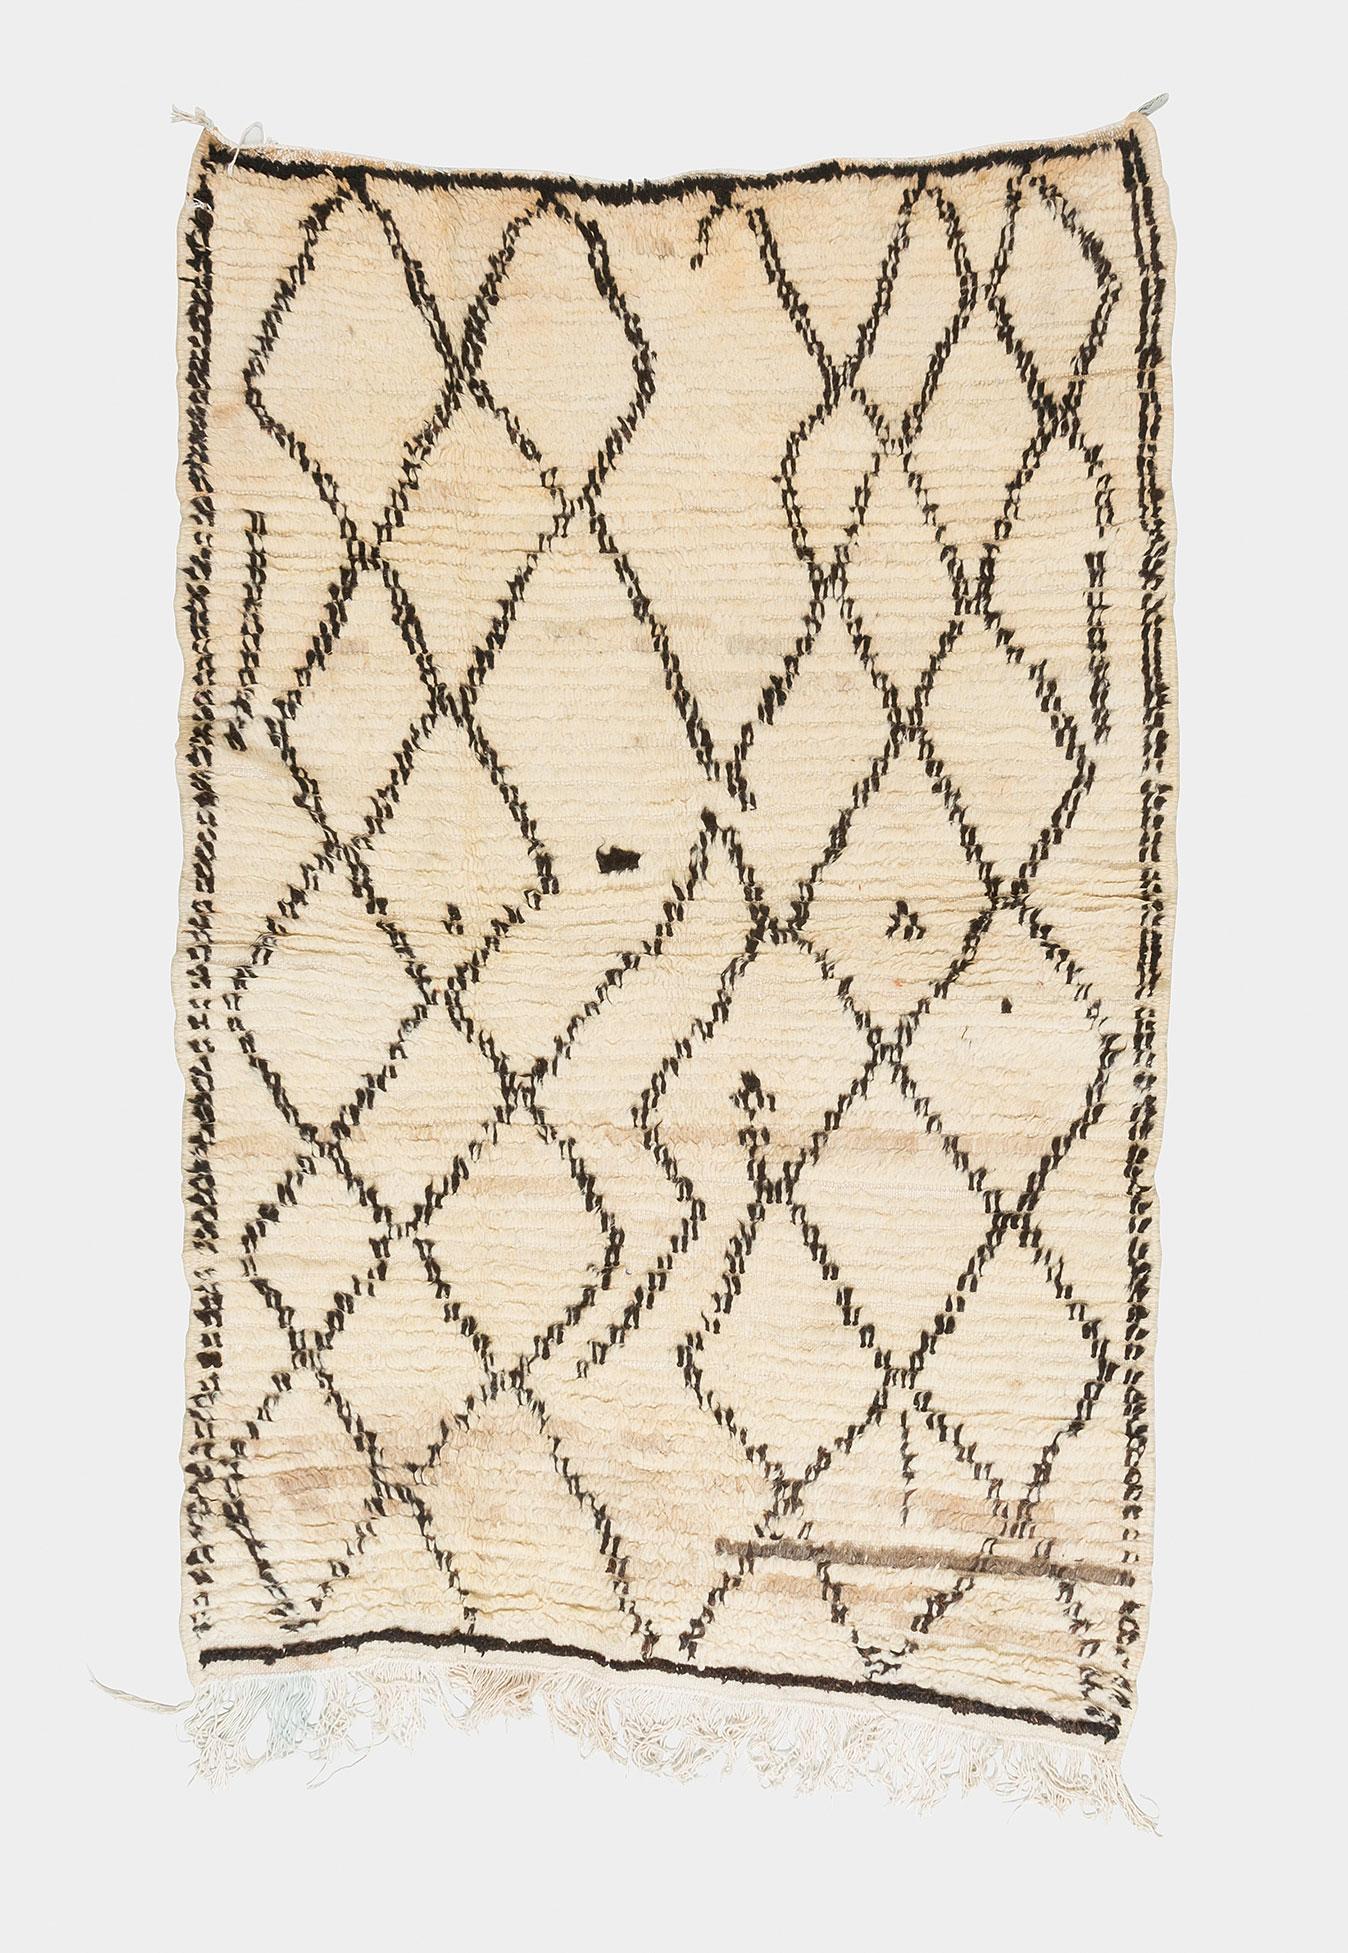 Classical Moroccan Berber rug from the Azilal region. Black, and brown pattern on natural off-white background. Greyish details. Medium-short pile.

This is an authentic Berber carpet from Morocco. In Berber tribes rugs are hand knotted by women